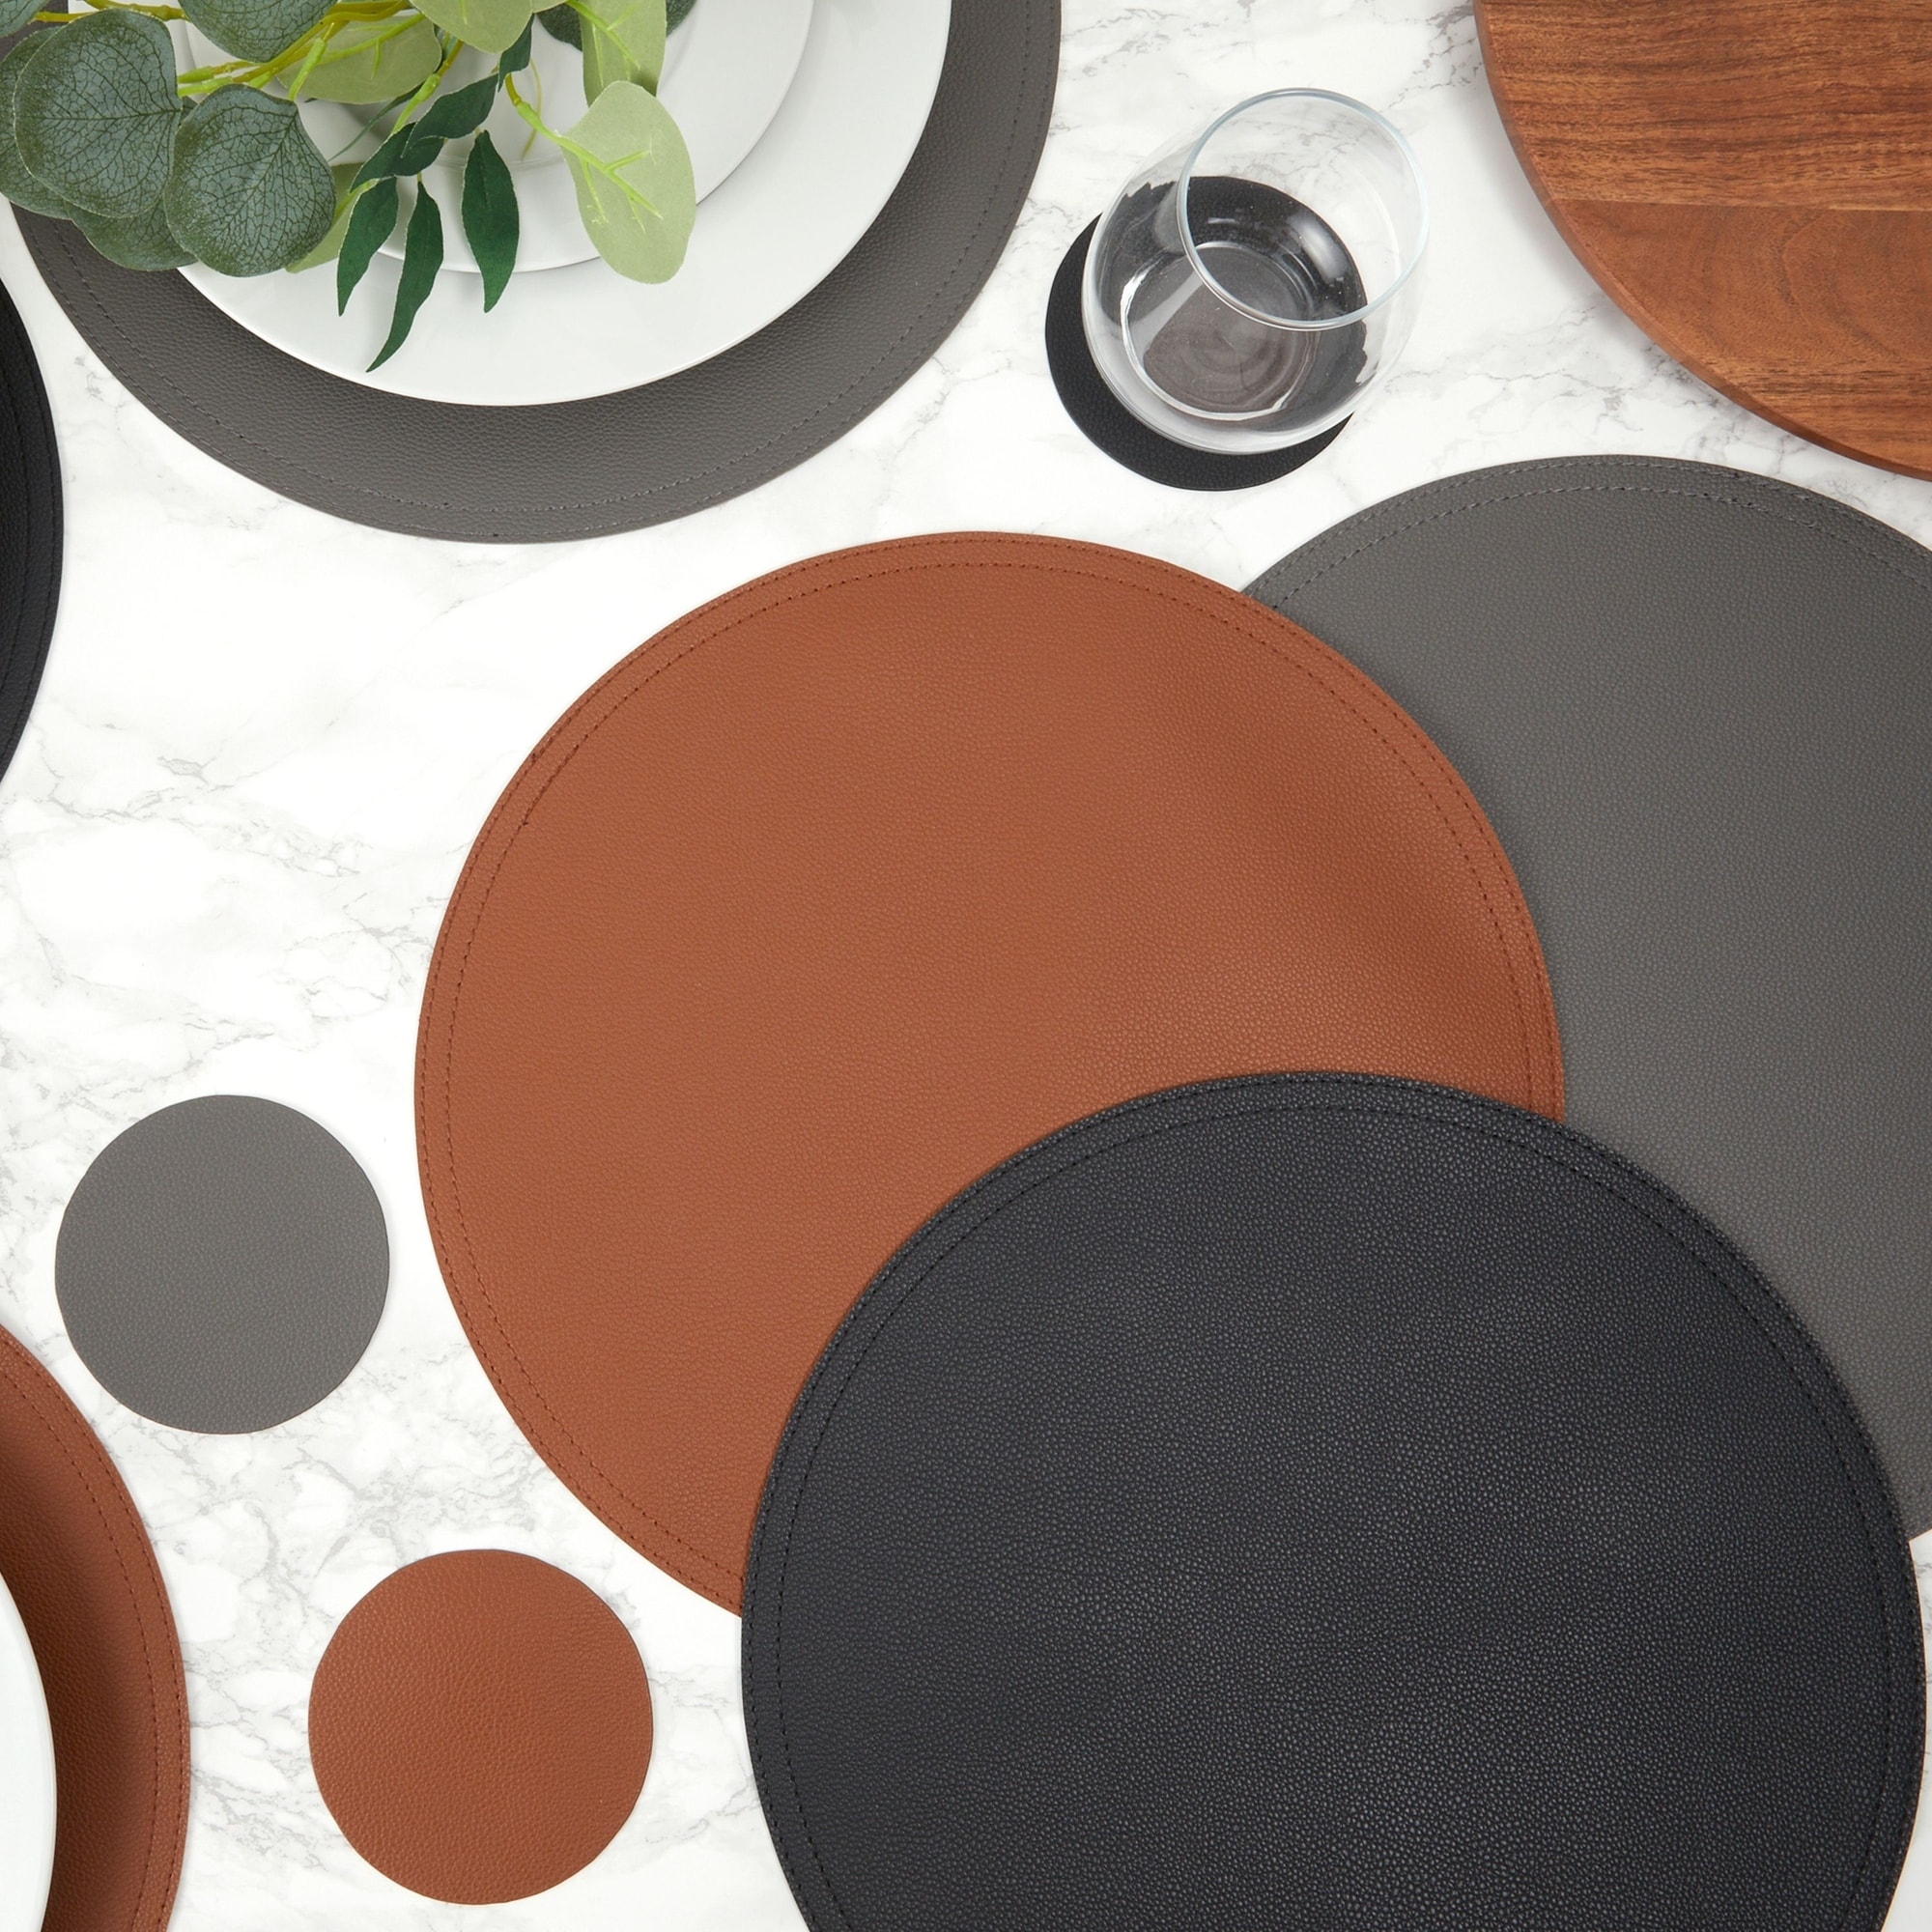 https://ak1.ostkcdn.com/images/products/is/images/direct/18b971249a1445da49c3a147f18be28d34fd9c4b/Set-of-6-Faux-Leather-Circle-Placemats-and-6-Round-Coasters-for-Dining-Room-Table-%28Dark-Grey%29.jpg